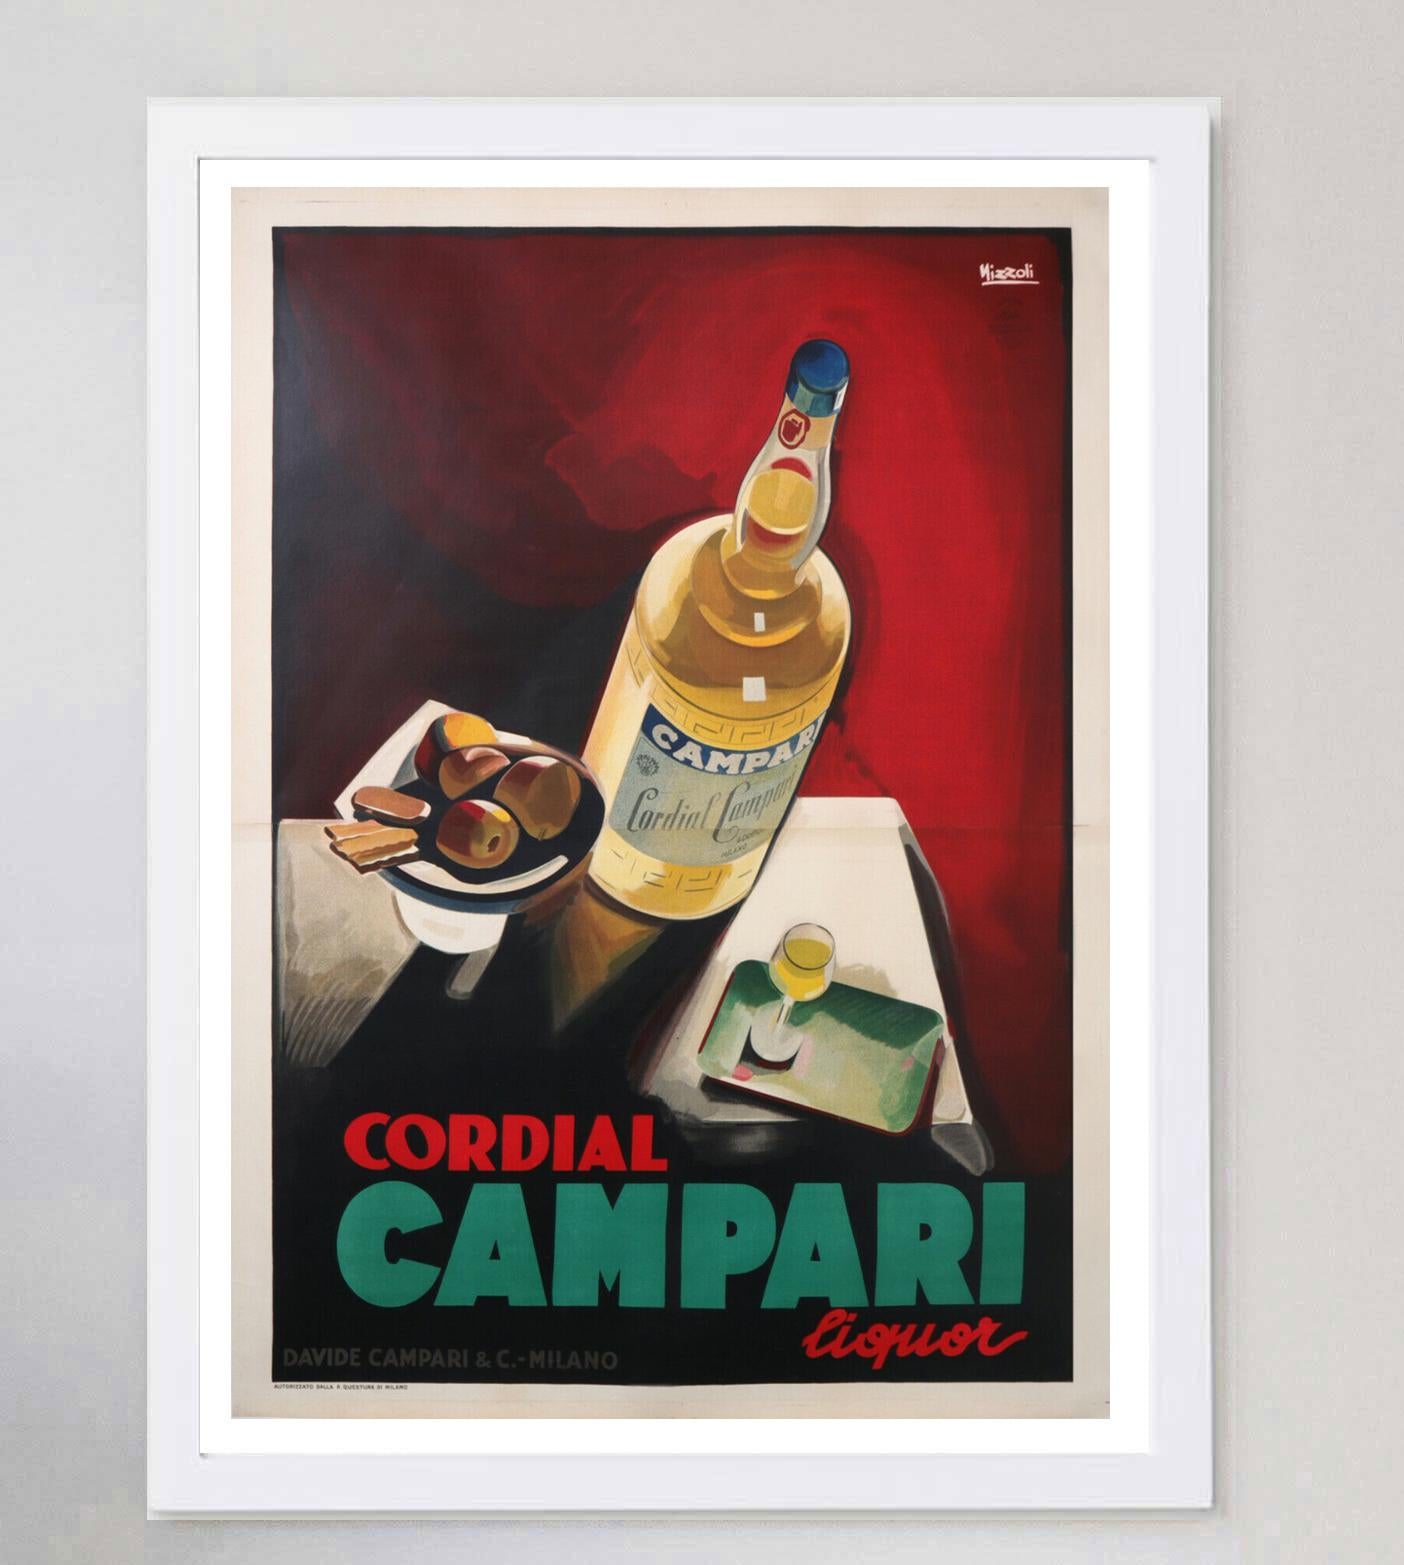 Stunning poster from 1925 created by Marcello Nizzoli for Italian liquor brand Campari.

Campari was formed in 1860 by Gaspare Campari and the aperitif is as popular today as ever. Gaspare's son Davide Campari transformed the company into what it